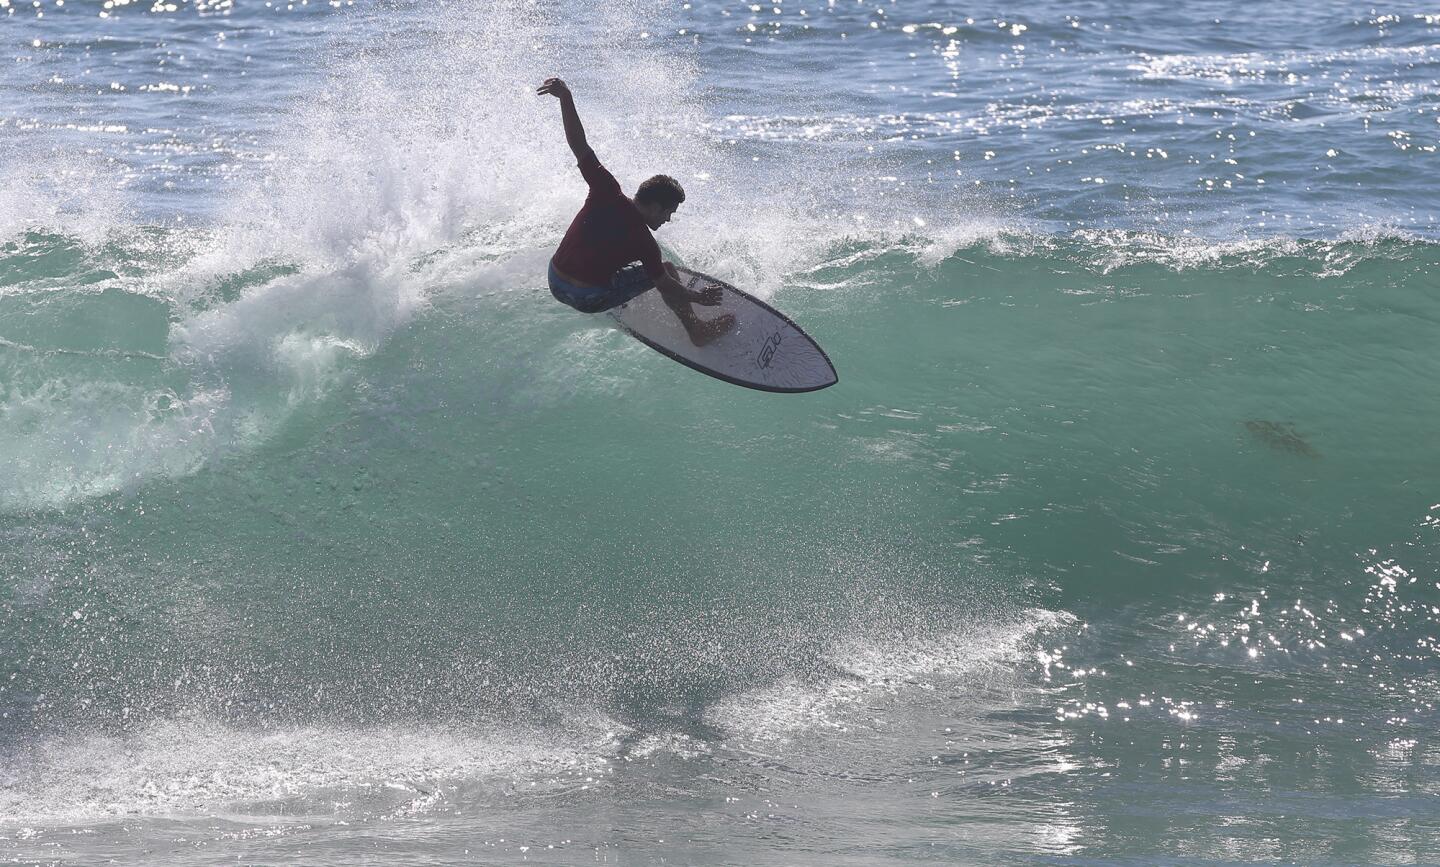 The 55th Brooks Street Classic surfing contest